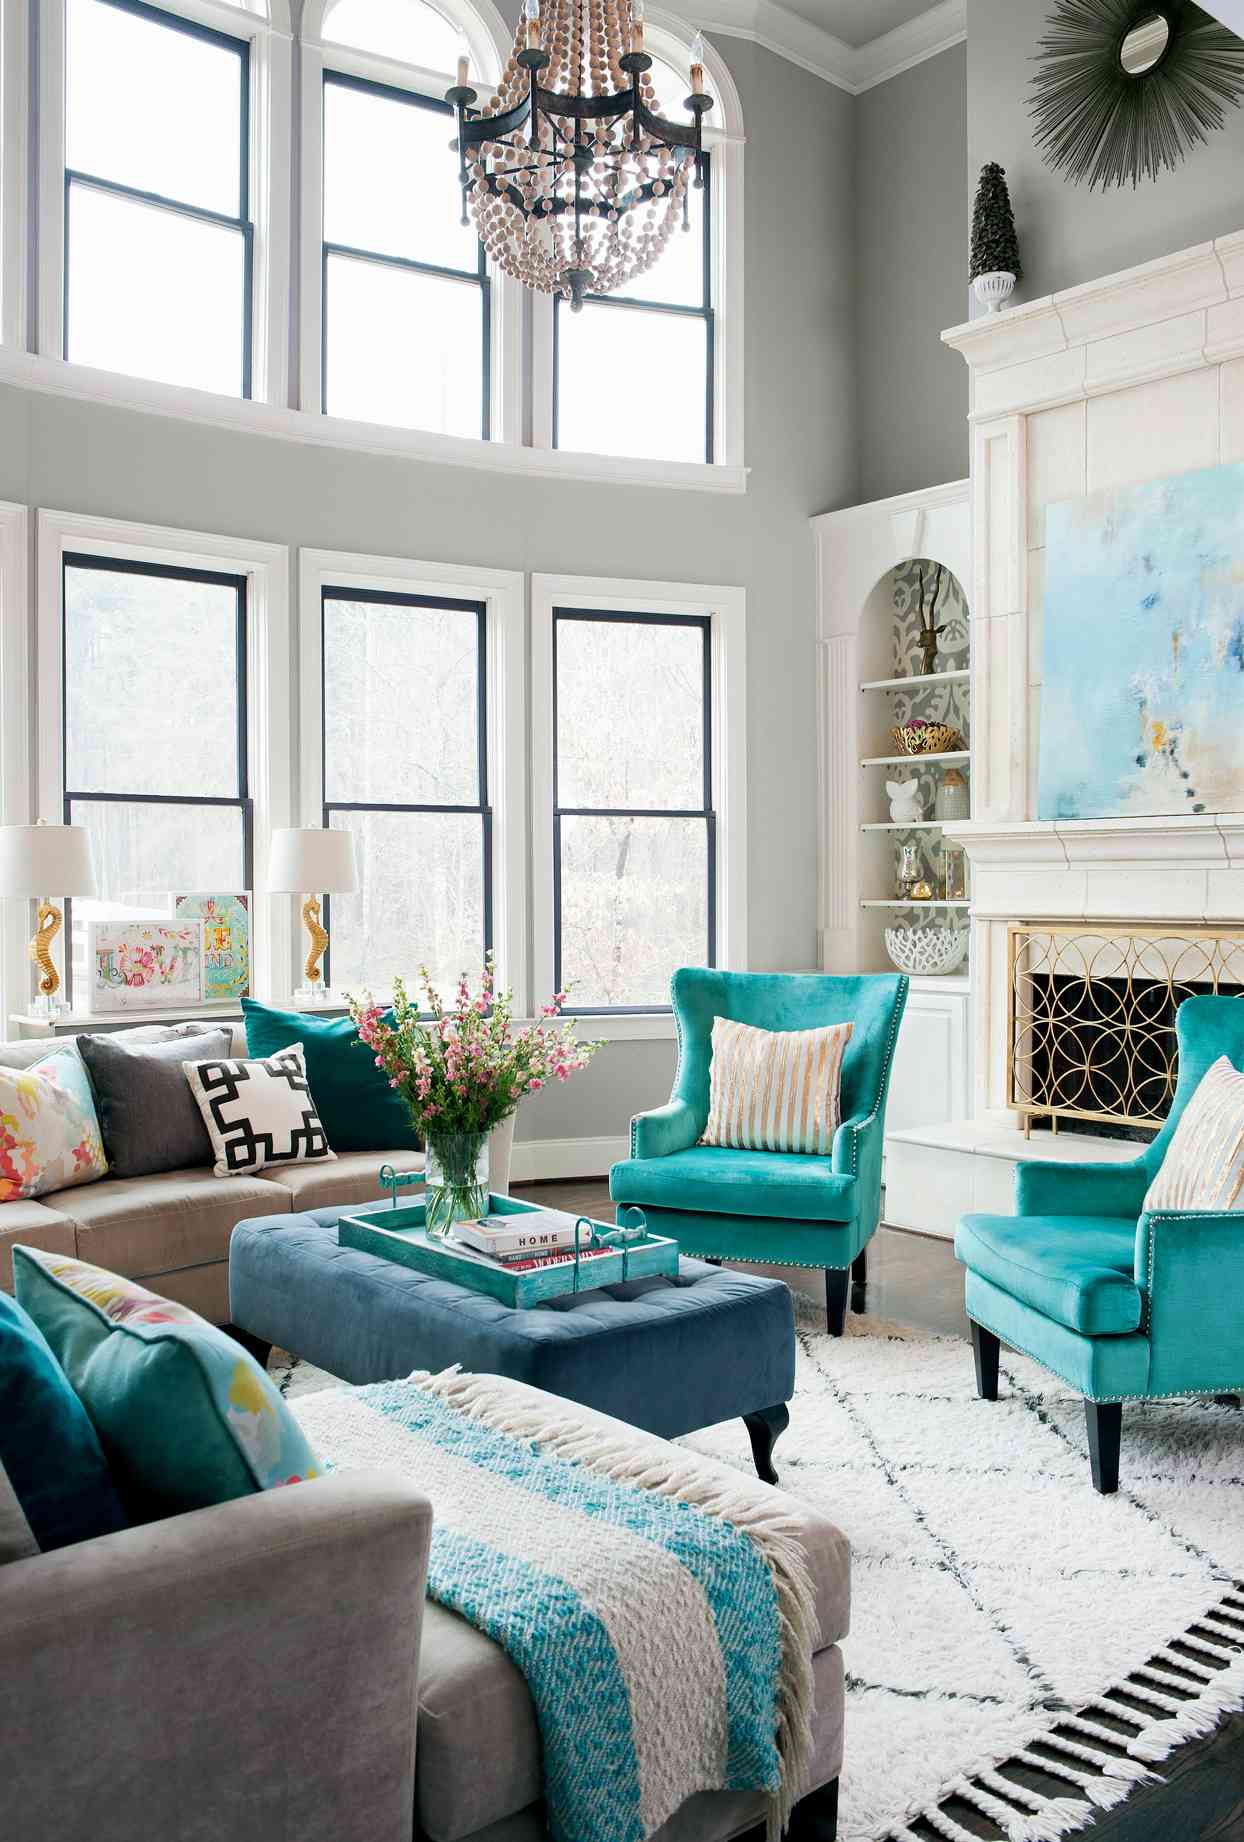 Turquoise and Gray Living Room